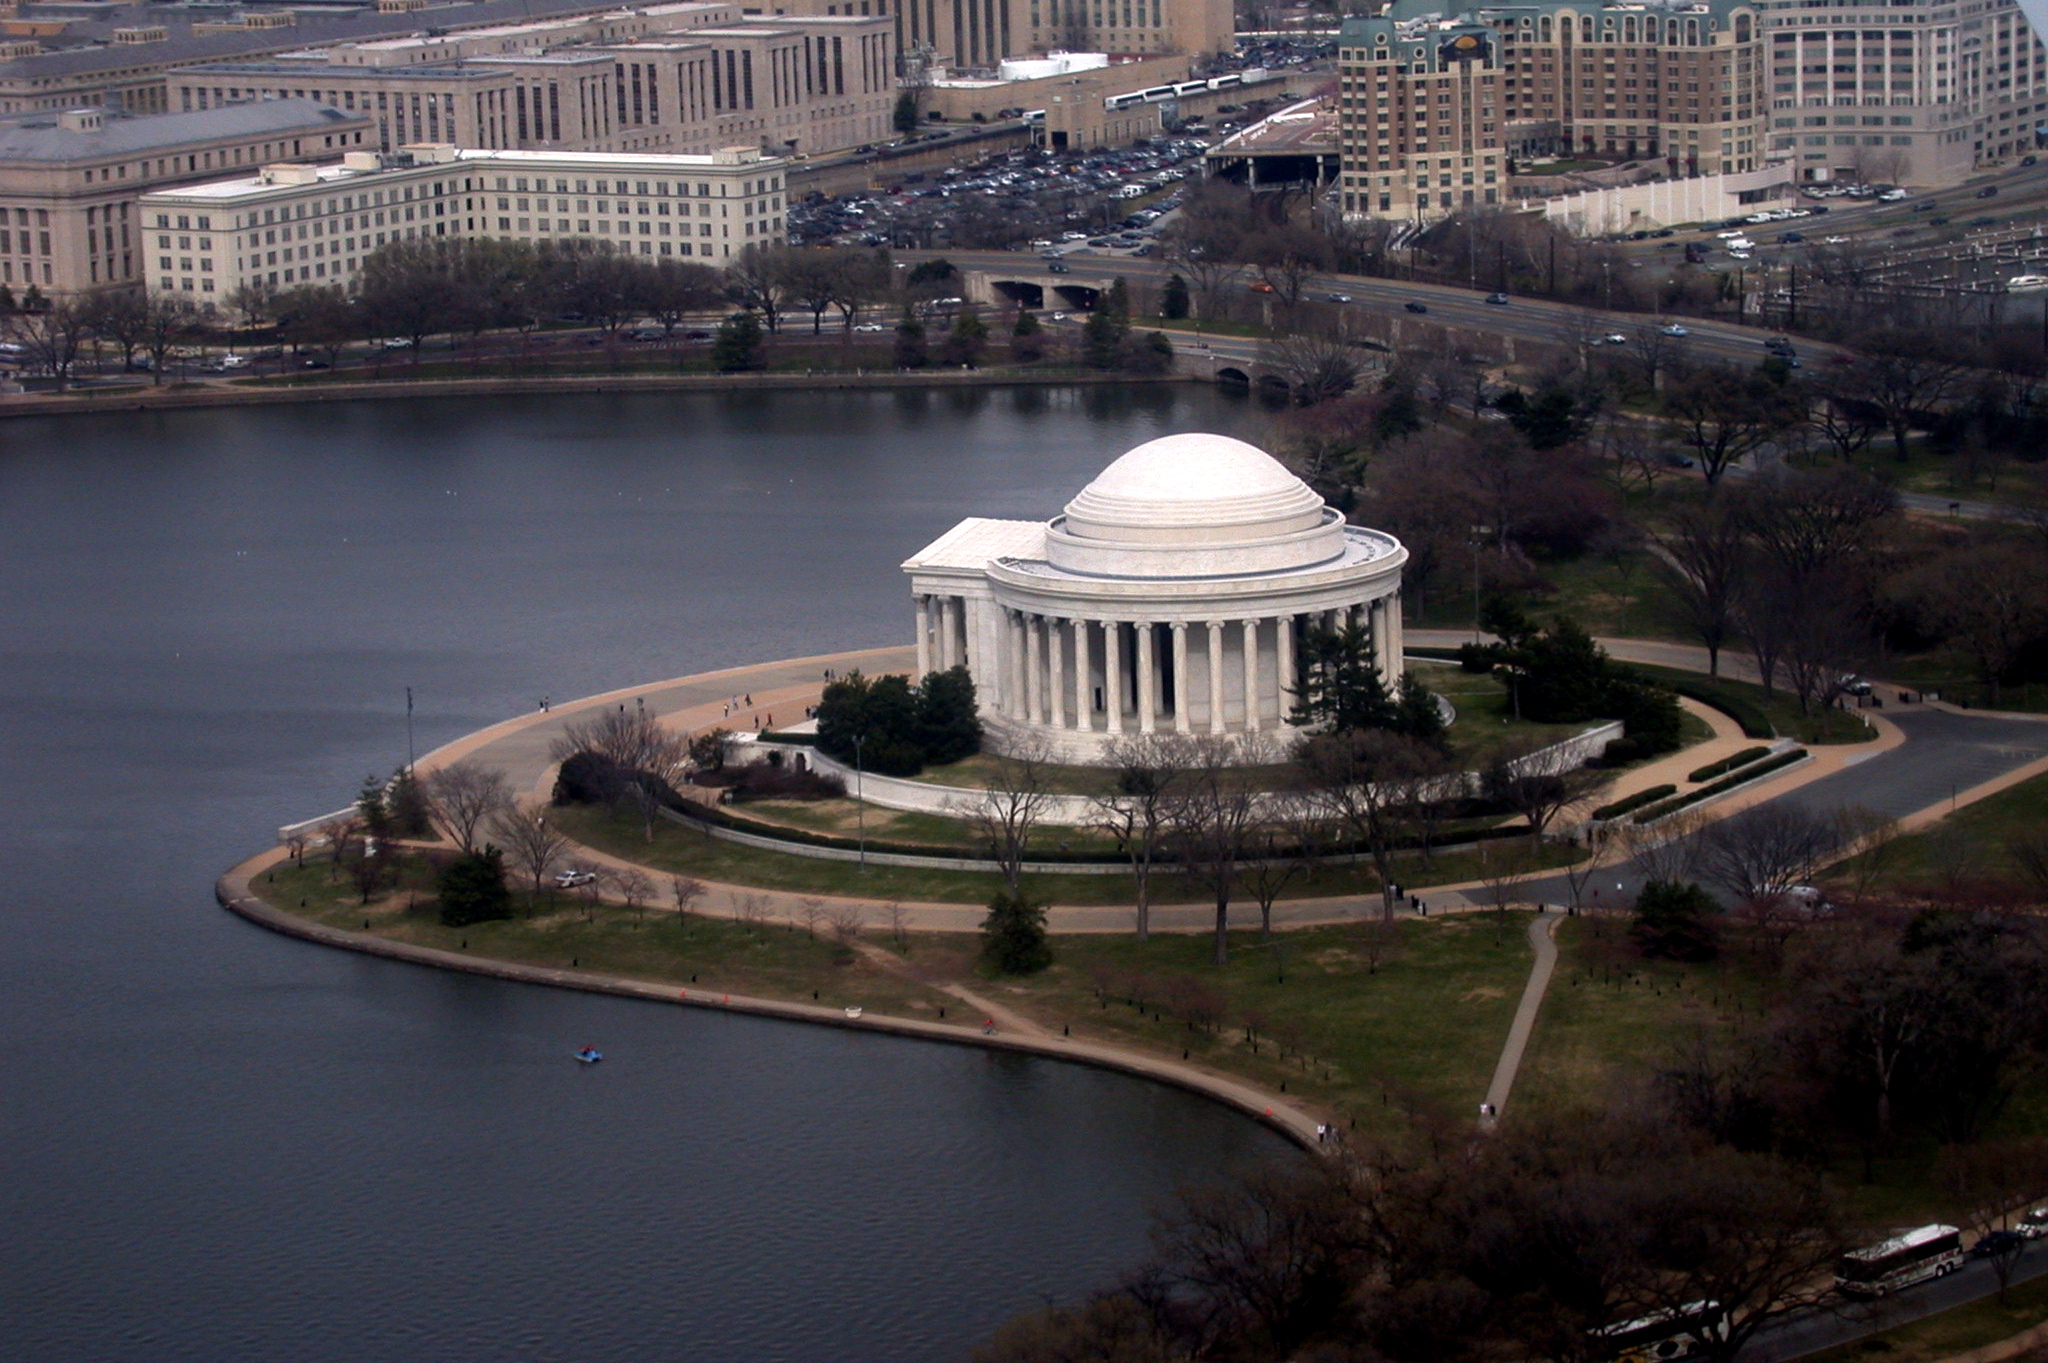 File:Jefferson Memorial from the air.jpg - Wikimedia Commons